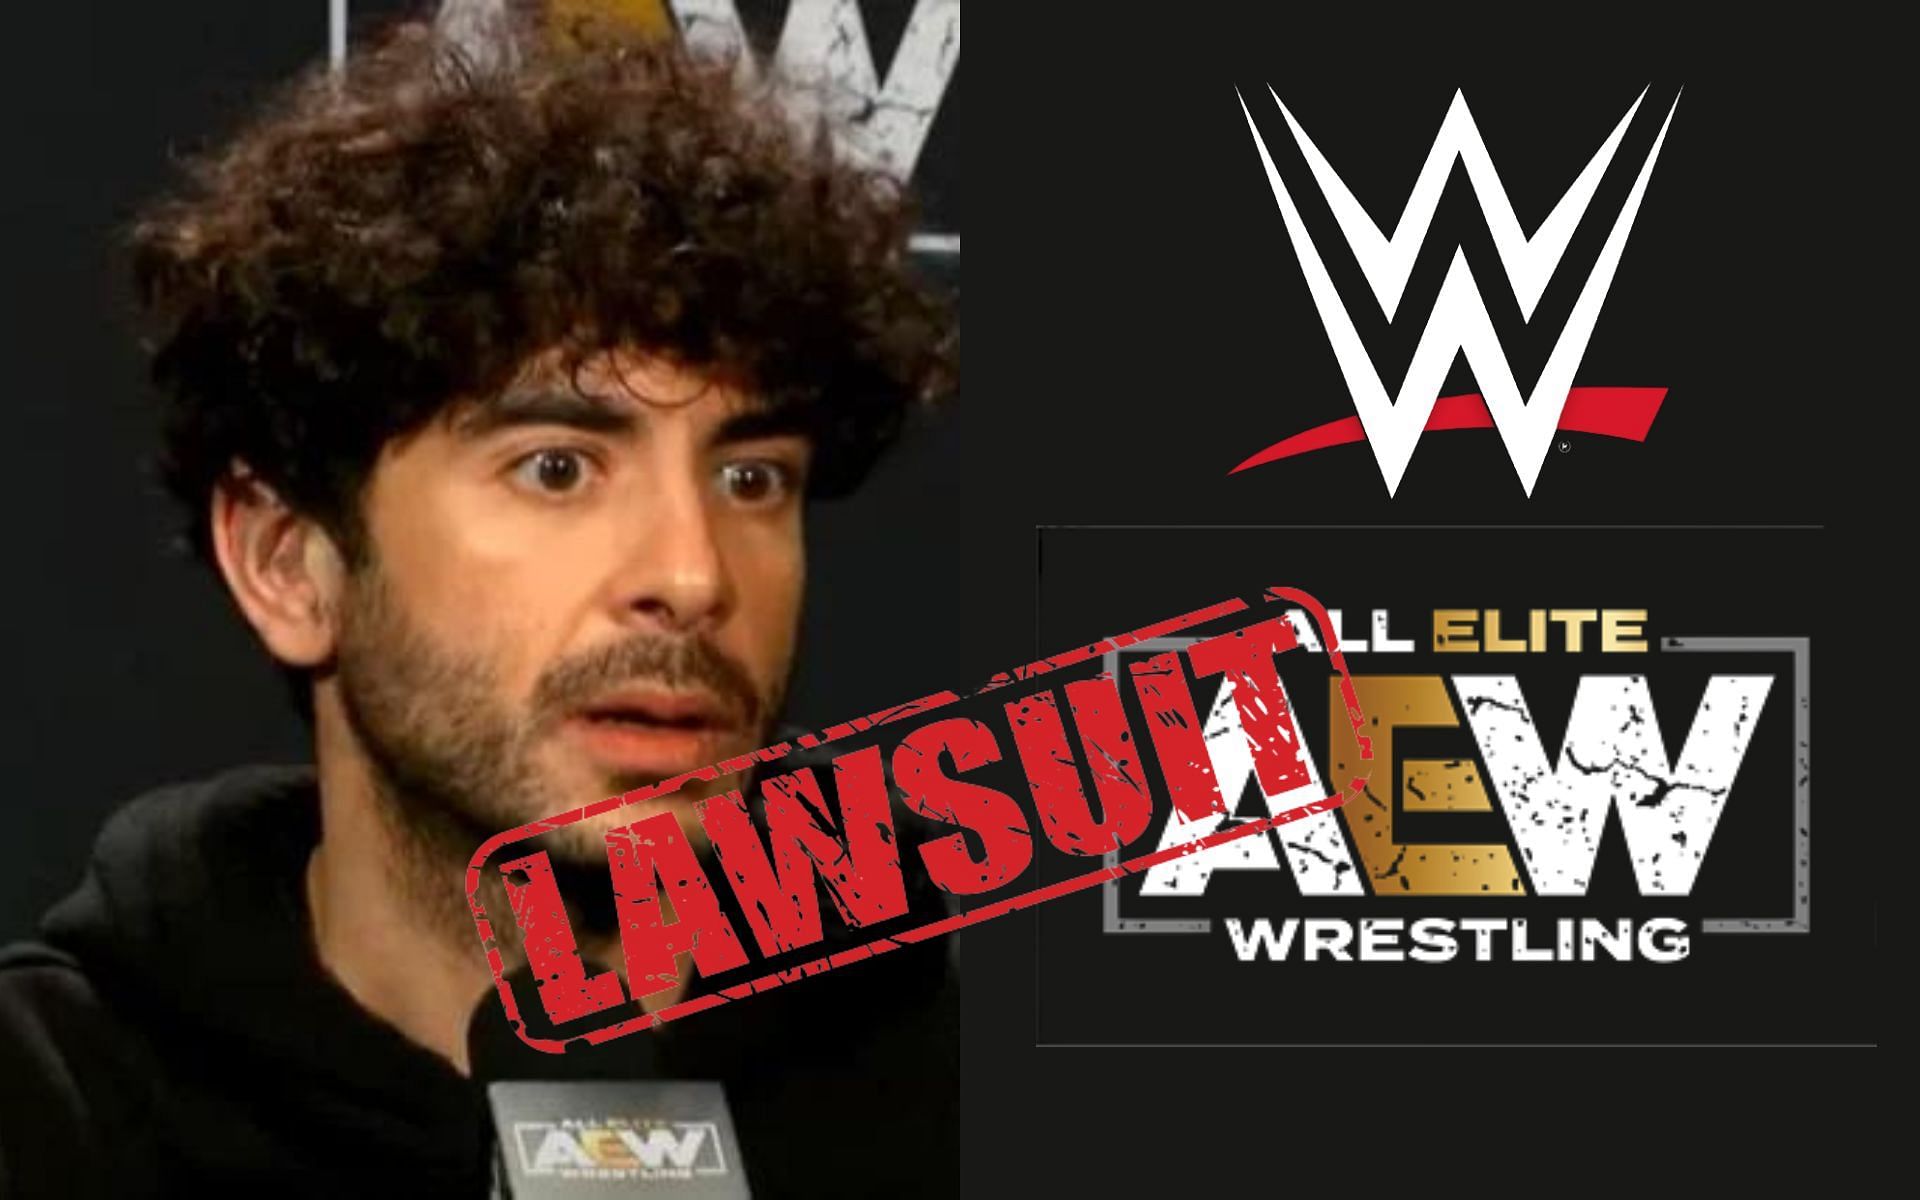 Tony Khan and AEW have garnered much backlash from wrestling fraternity for botches in the ring